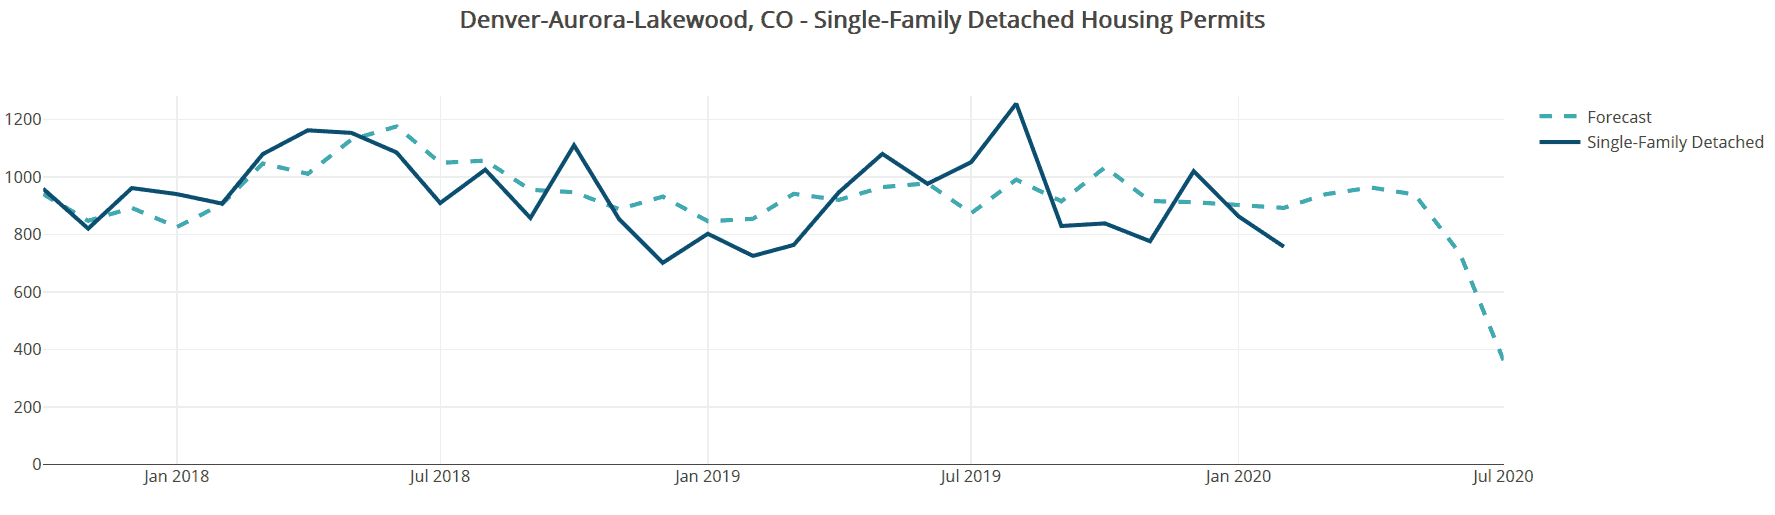 Worst case scenario for Colorado's COVID-19 Housing Market - large increase in unemployment, and big declines in lending activity and market confidence